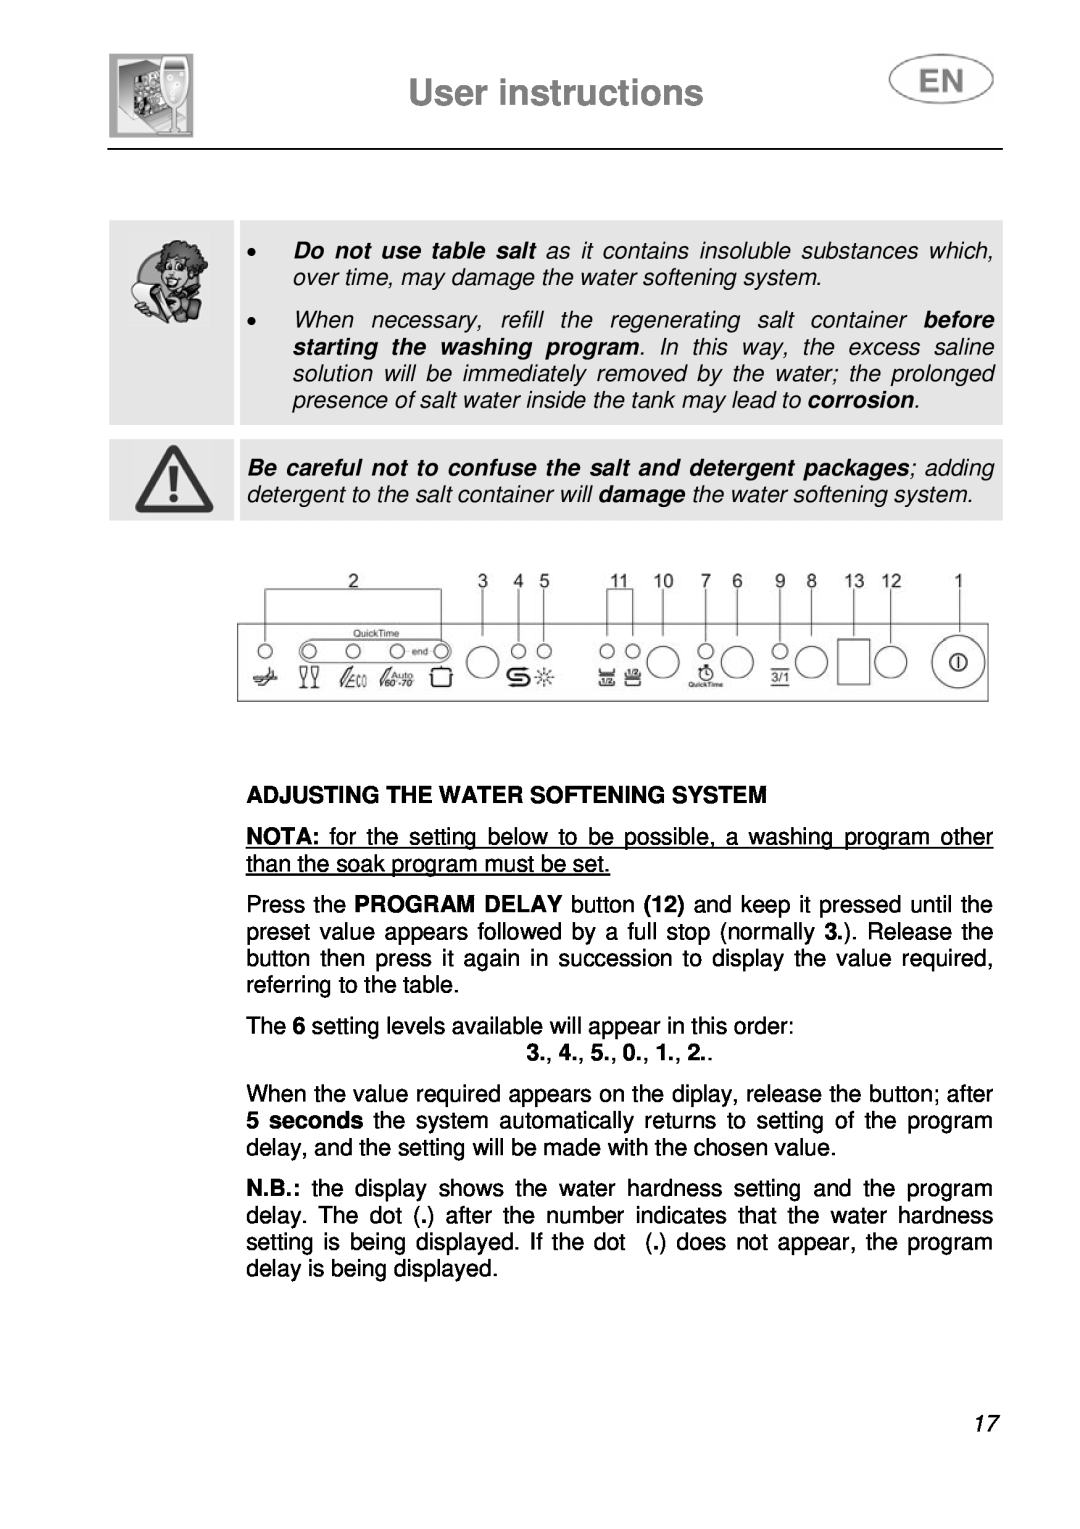 Smeg DI612A1 instruction manual User instructions, Adjusting The Water Softening System 